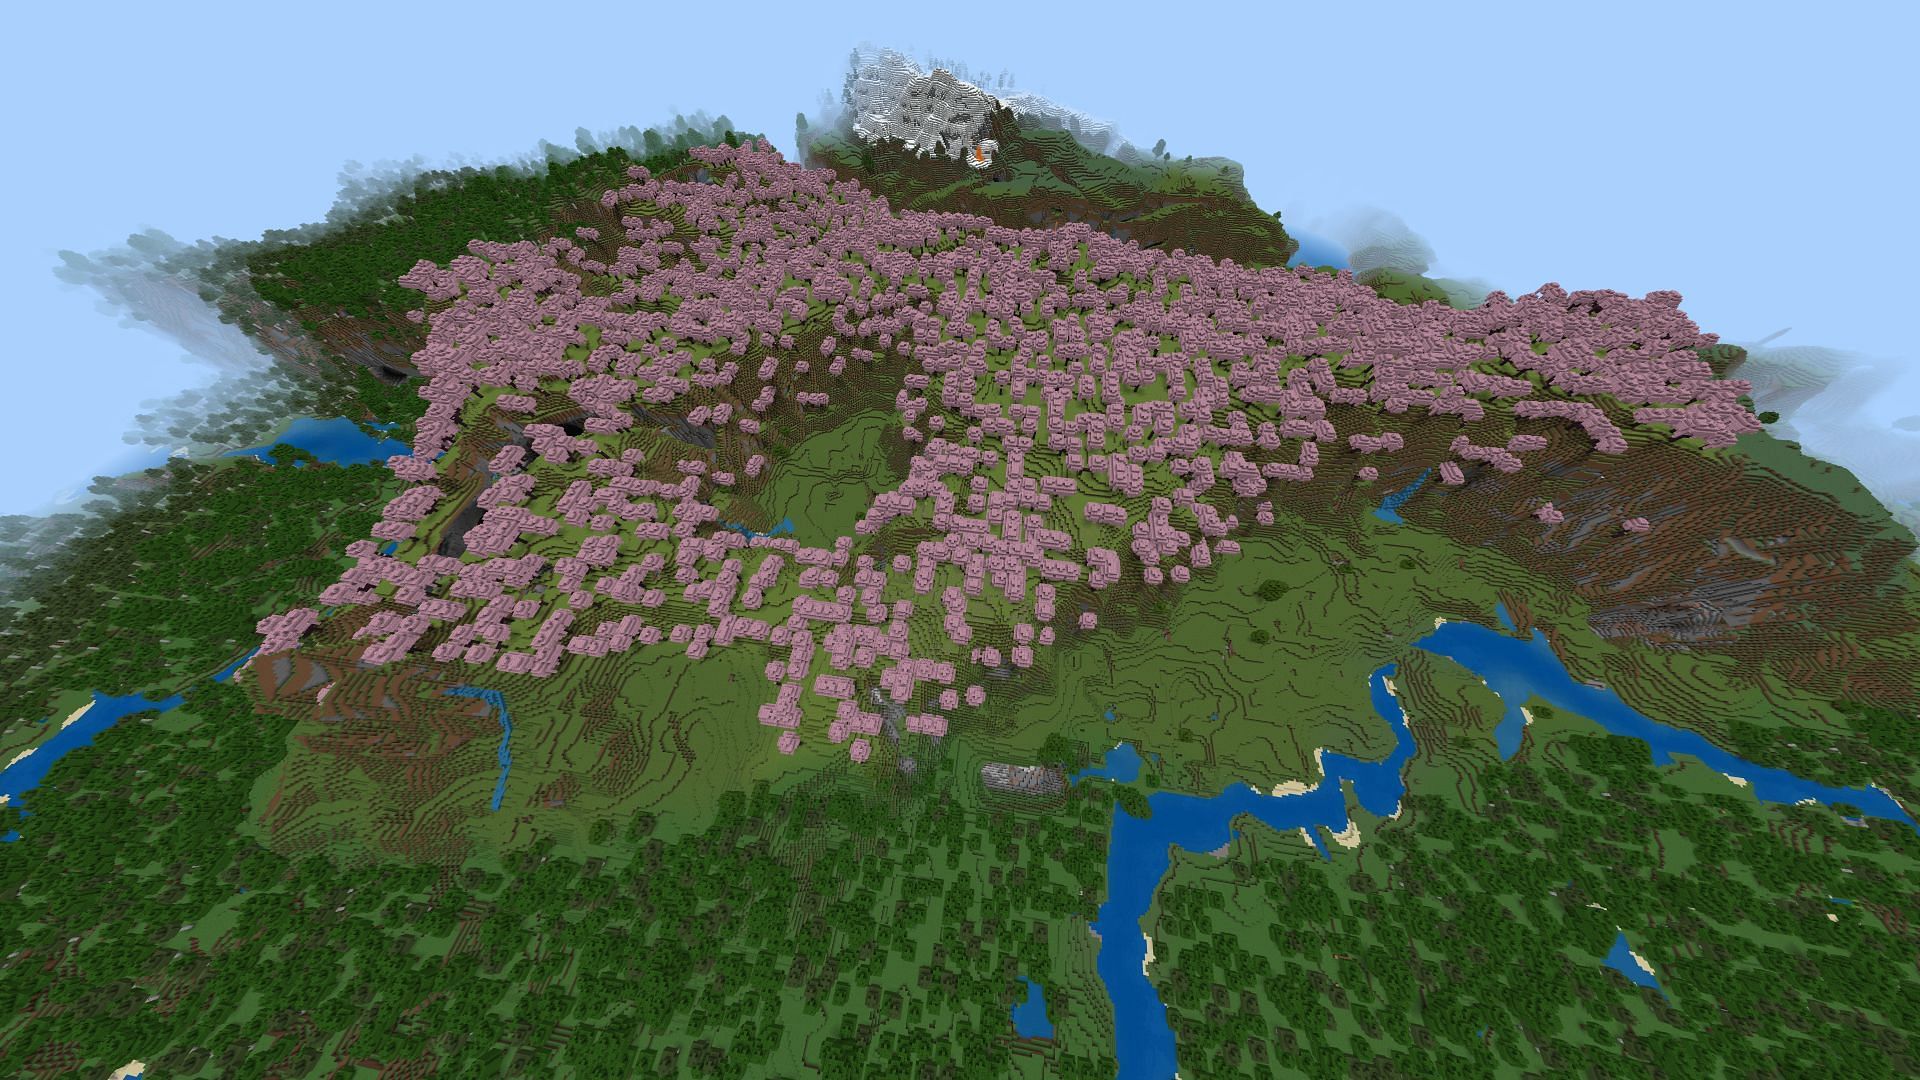 The cherry grove spawn of this seed has multiple trial chambers in close proximity (Image via Mojang)